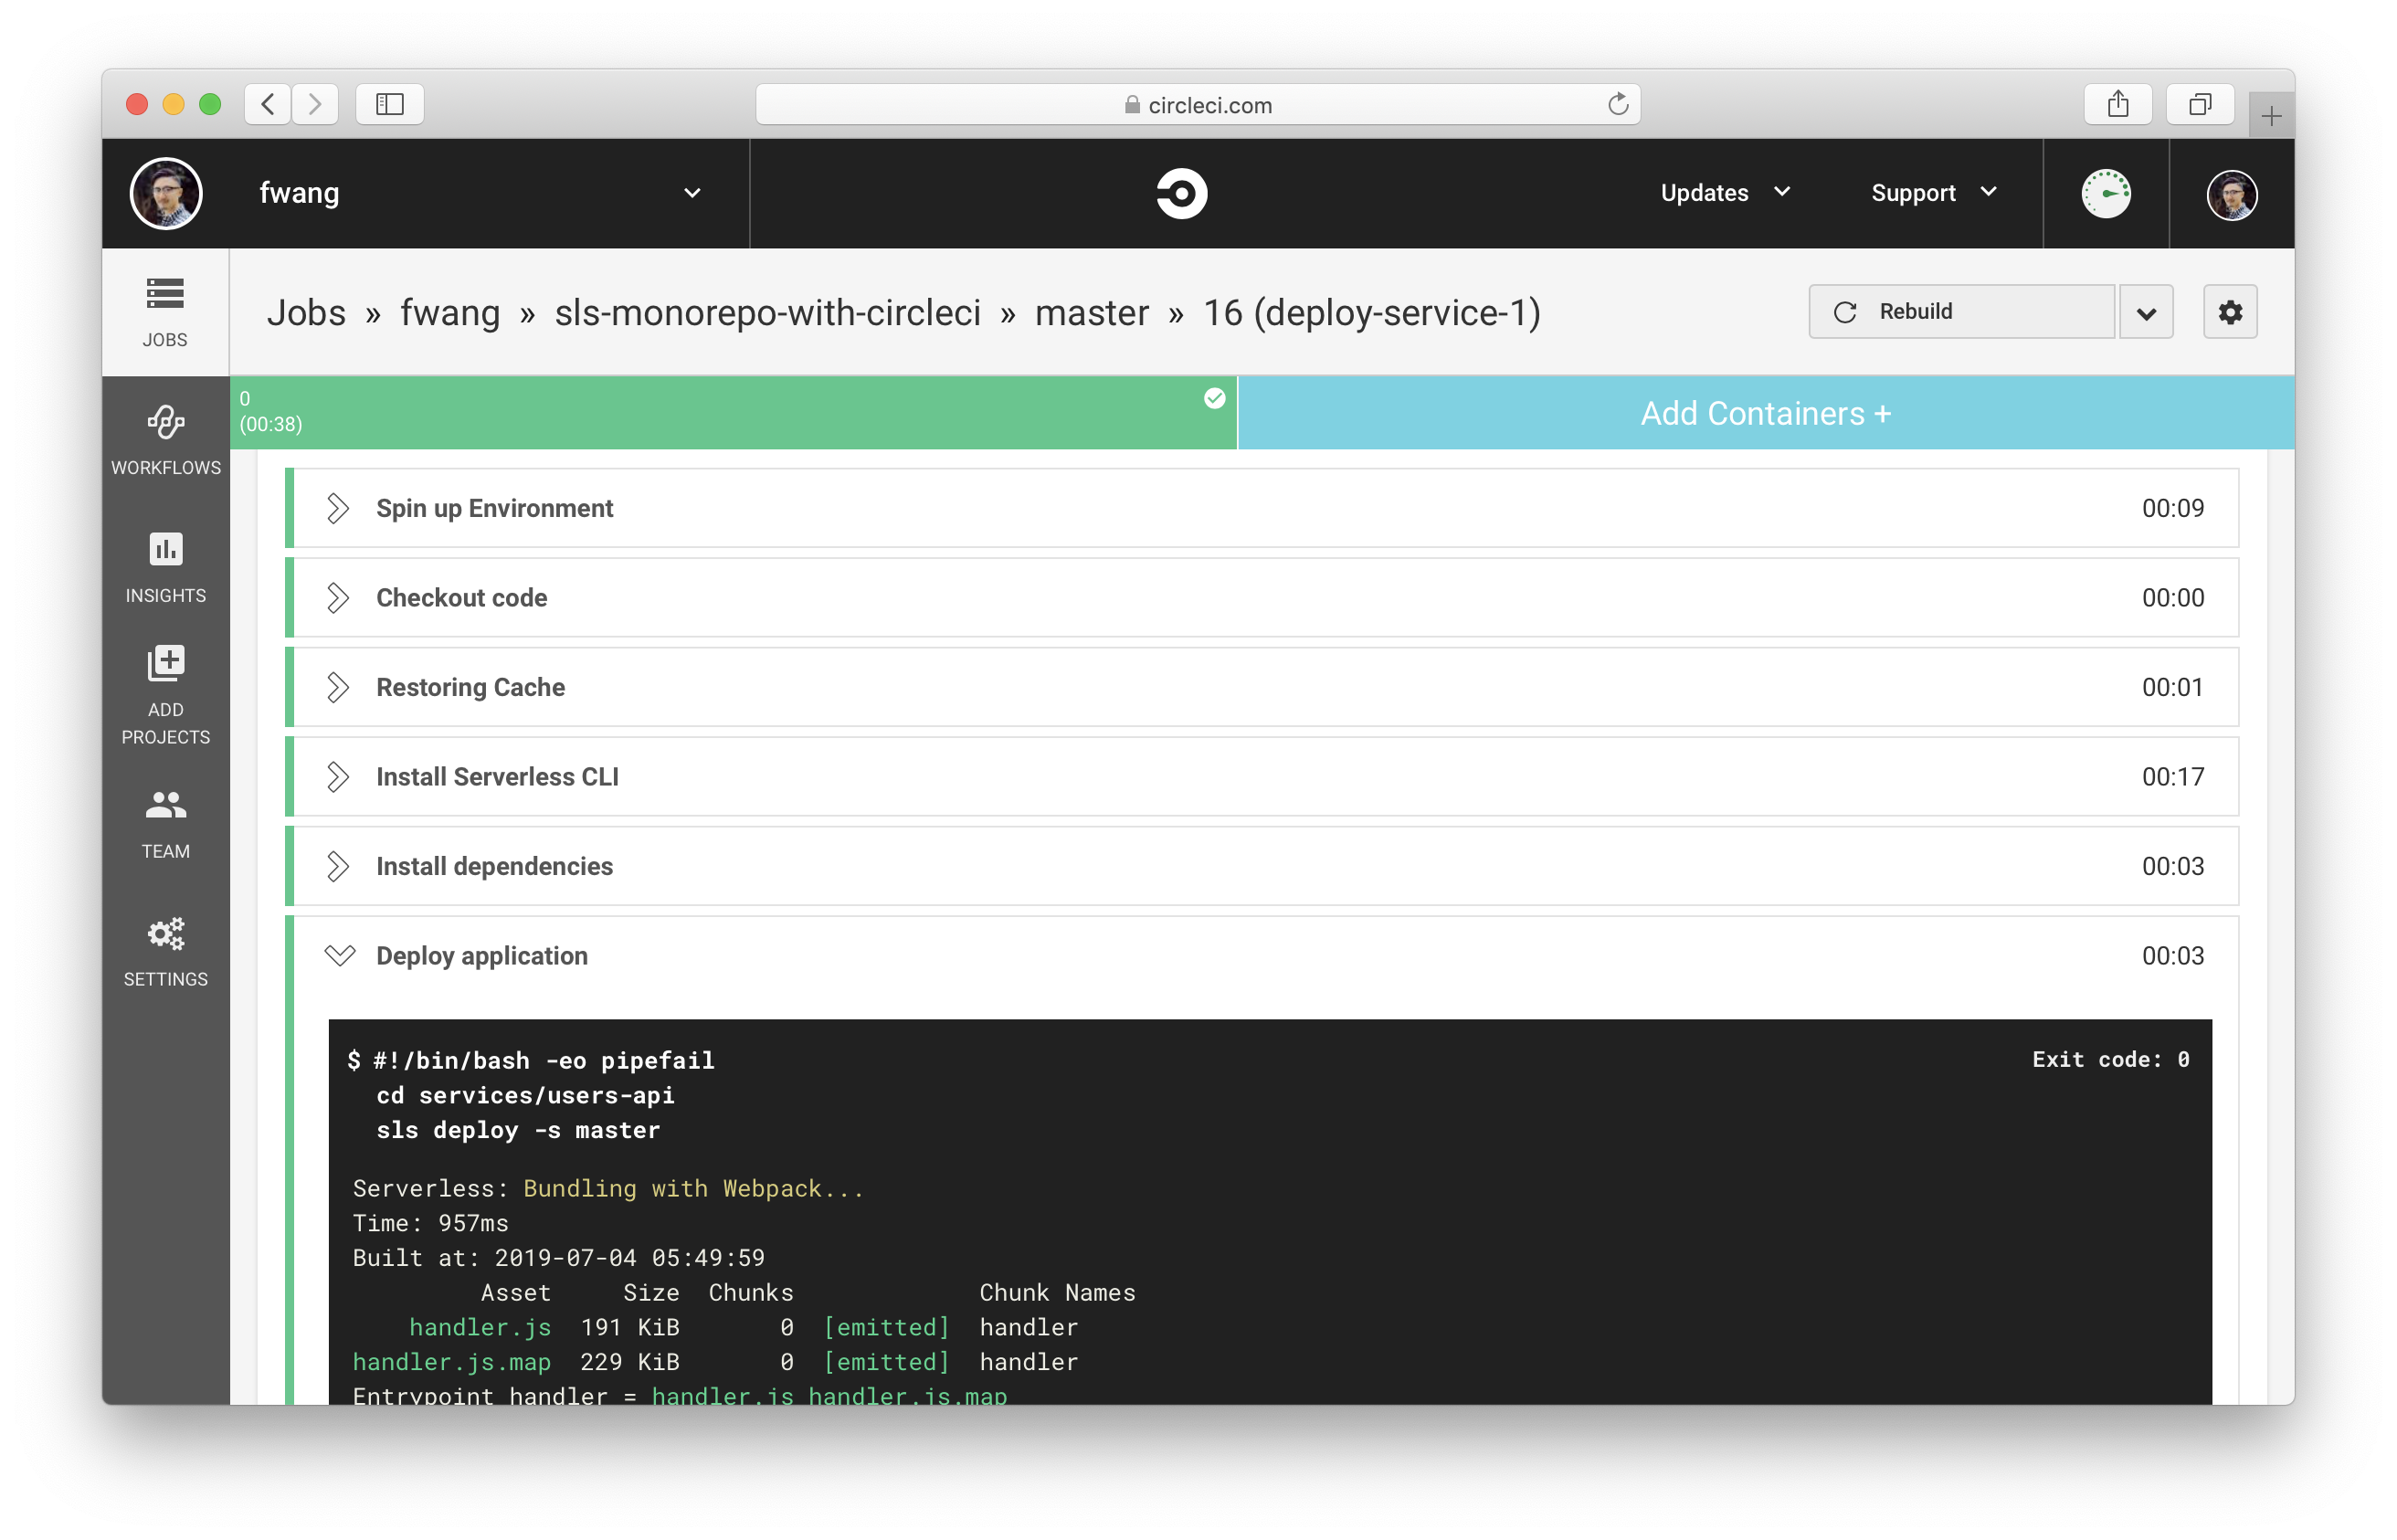 View build logs in CircleCI